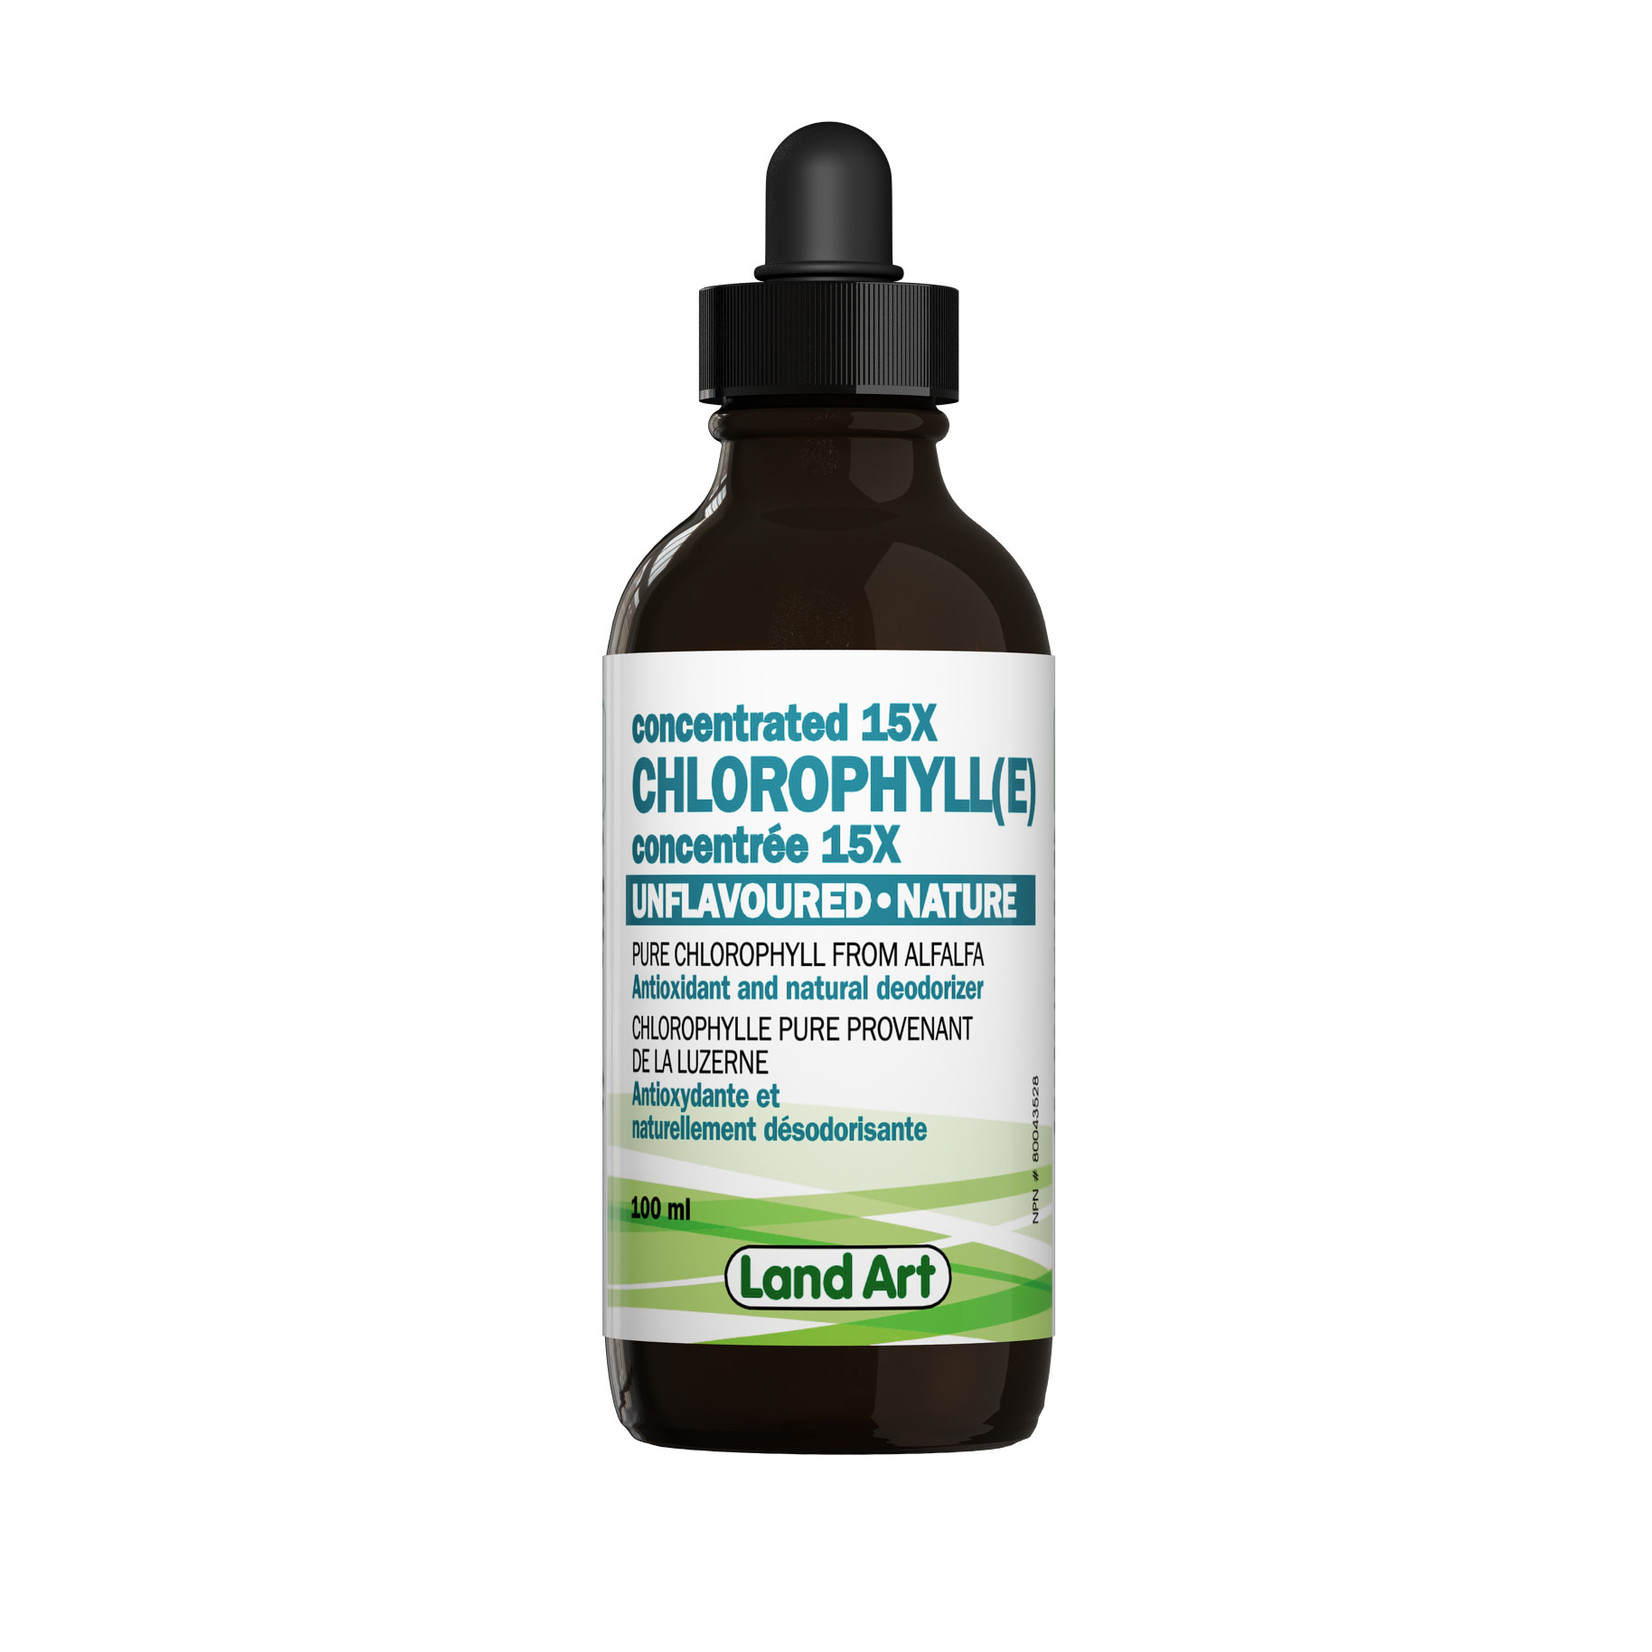 LAND ART LAND ART CHLOROPHYLL CONCENTRATED 15X 100ML DROPPER